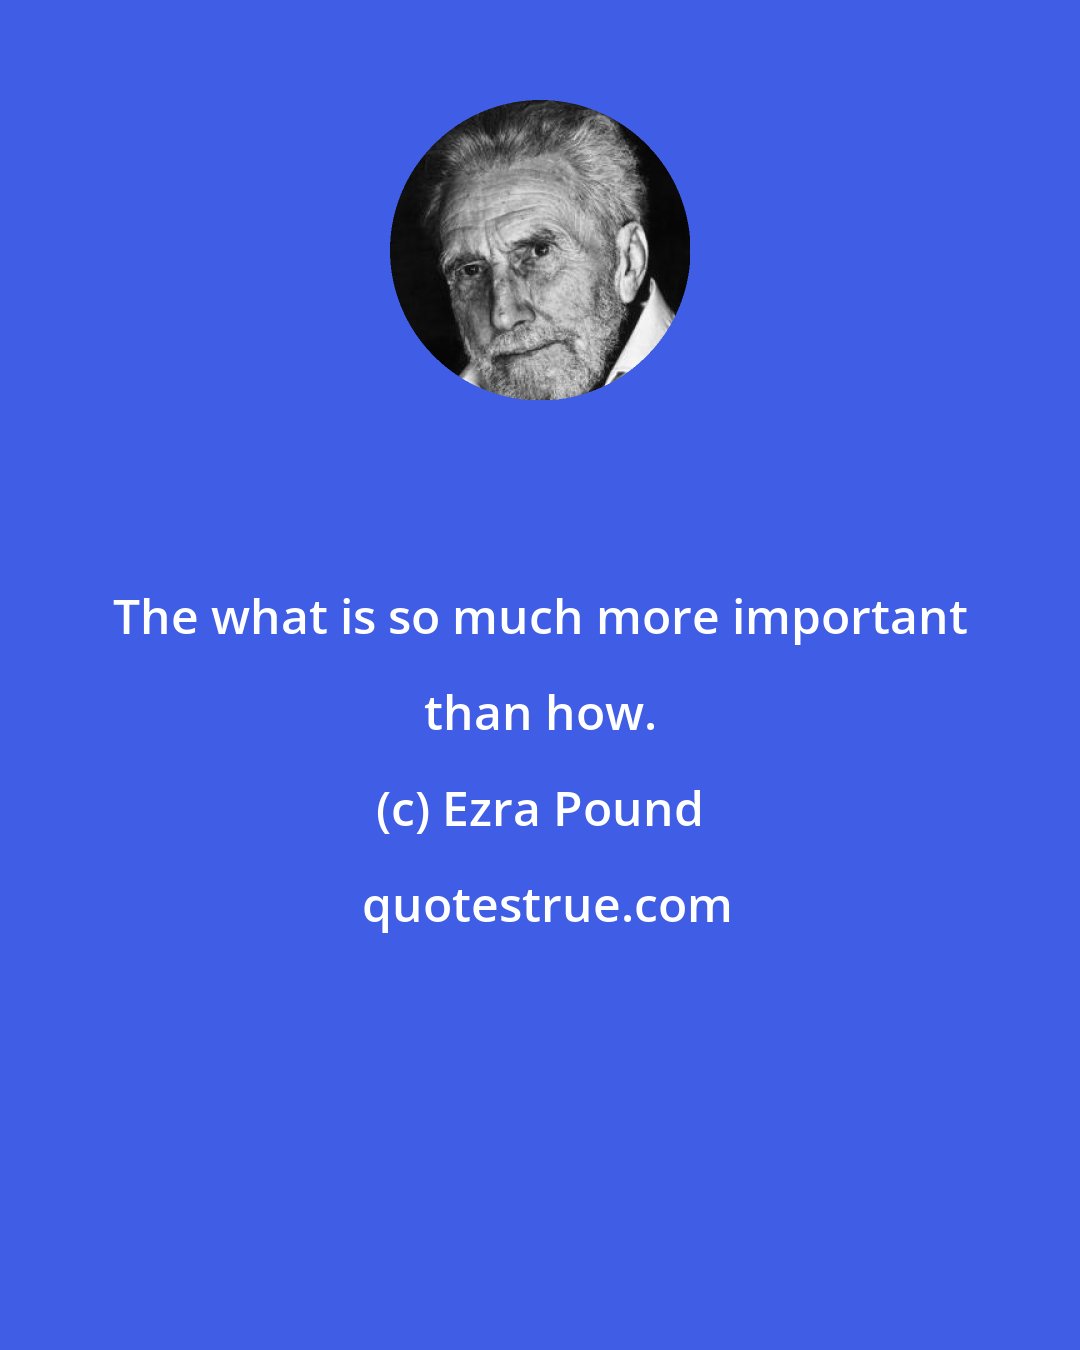 Ezra Pound: The what is so much more important than how.